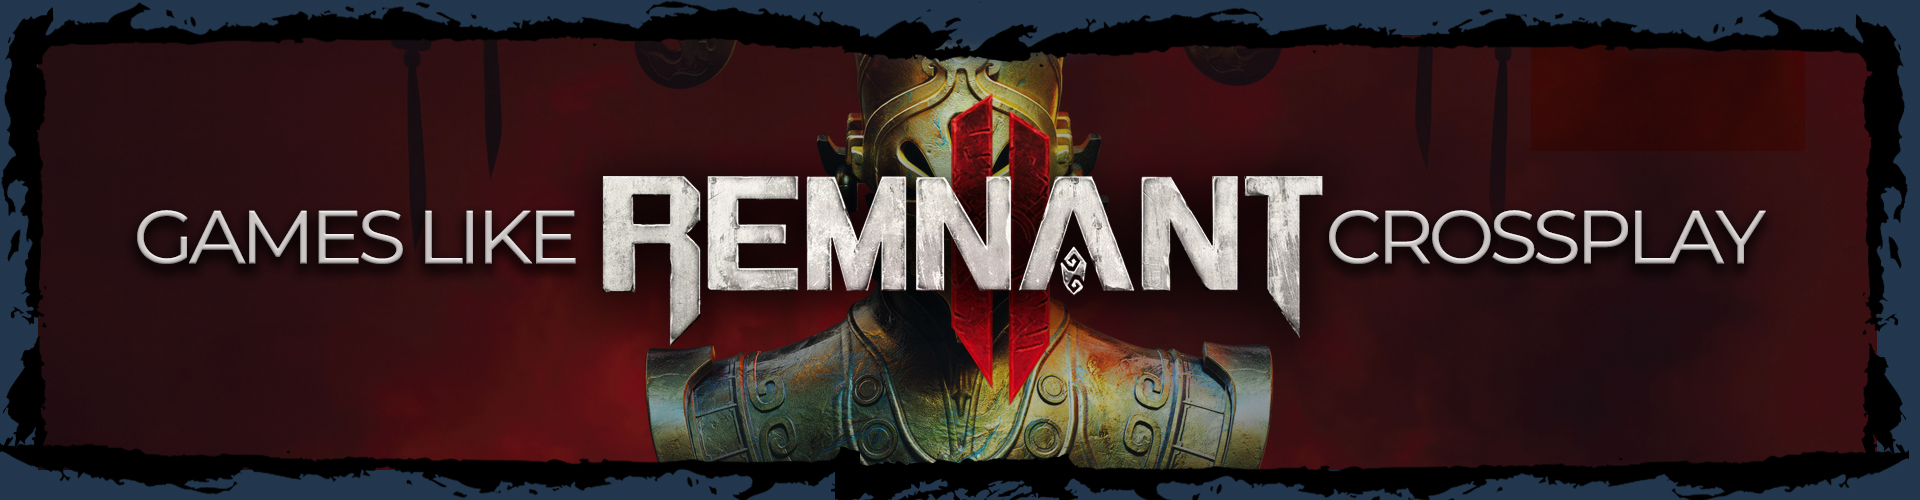 Games like Remnant 2 Crossplay